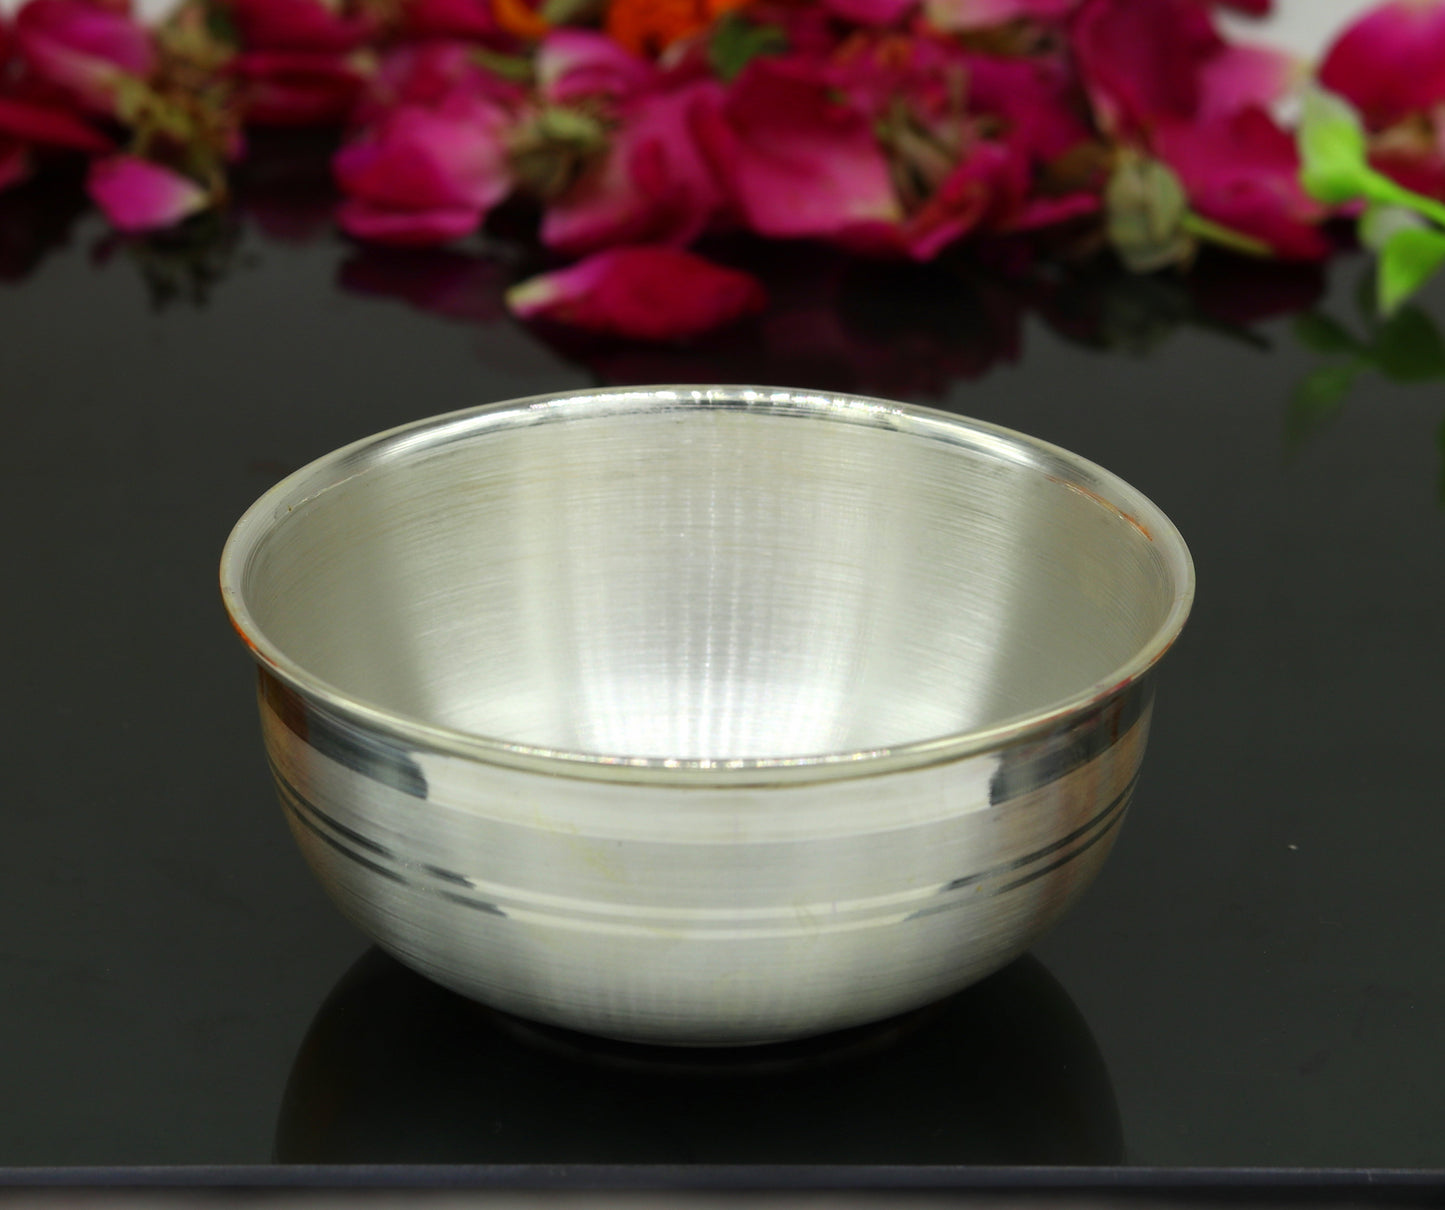 999 pure sterling silver handmade solid silver bowl kitchen utensils, vessels, silver has antibacterial properties, keep stay healthy sv53 - TRIBAL ORNAMENTS